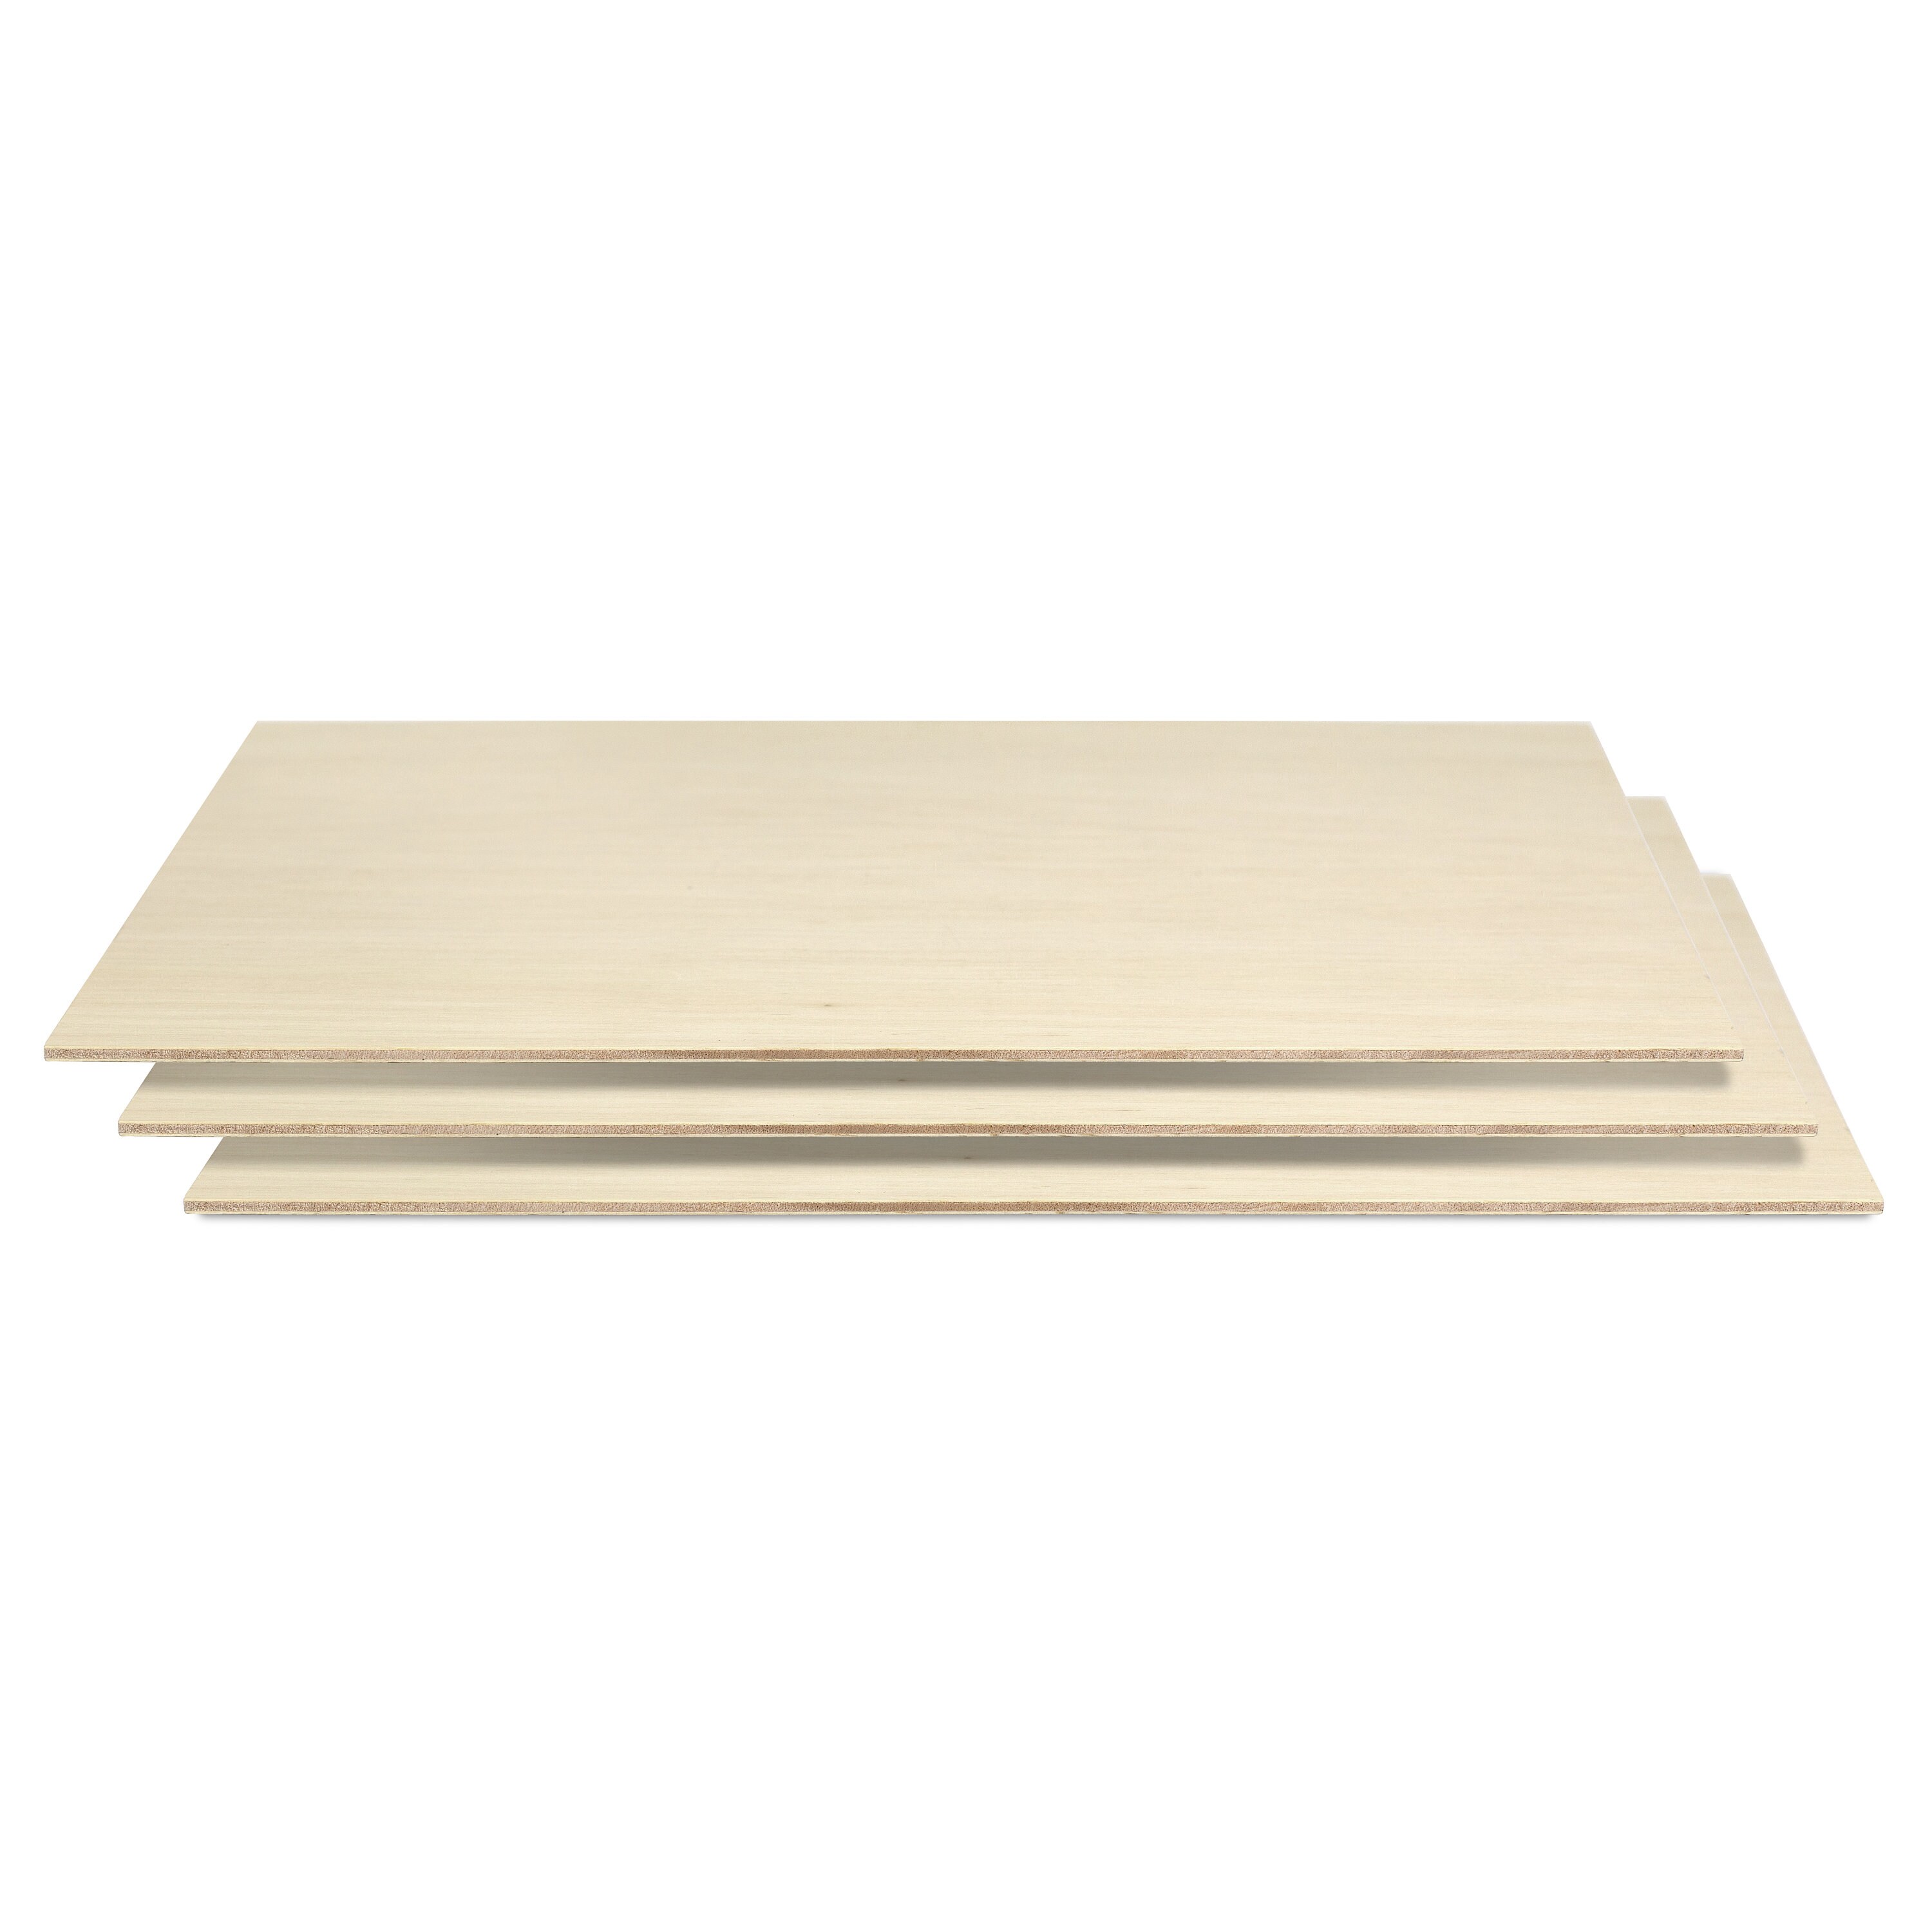 GDGDSY Basswood Sheets 12 x 12 Inch Unfinished Balsa Nepal